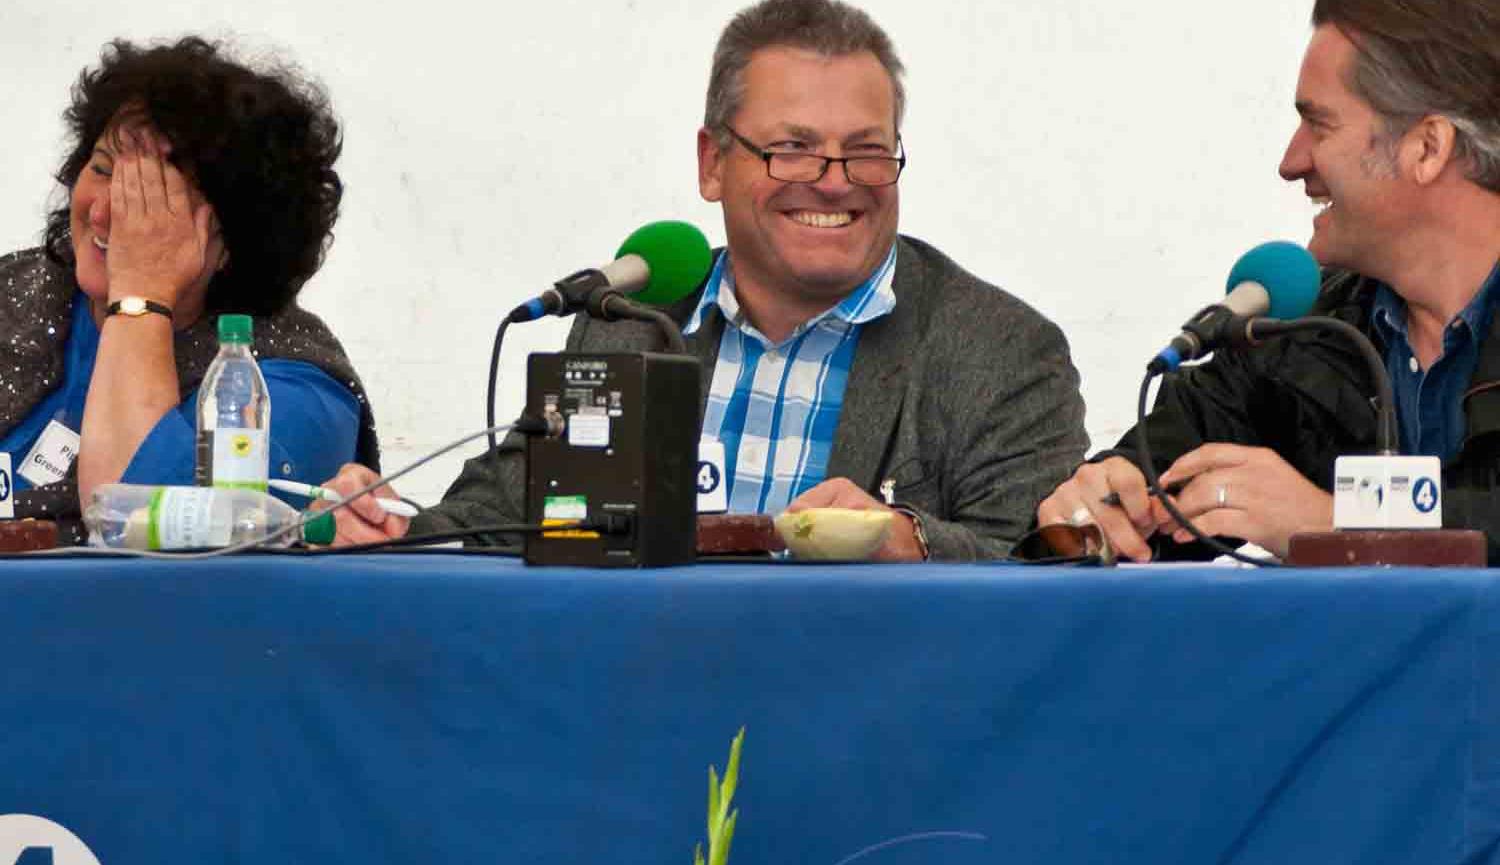 Panel of three people sat behind table covered in blue cloth